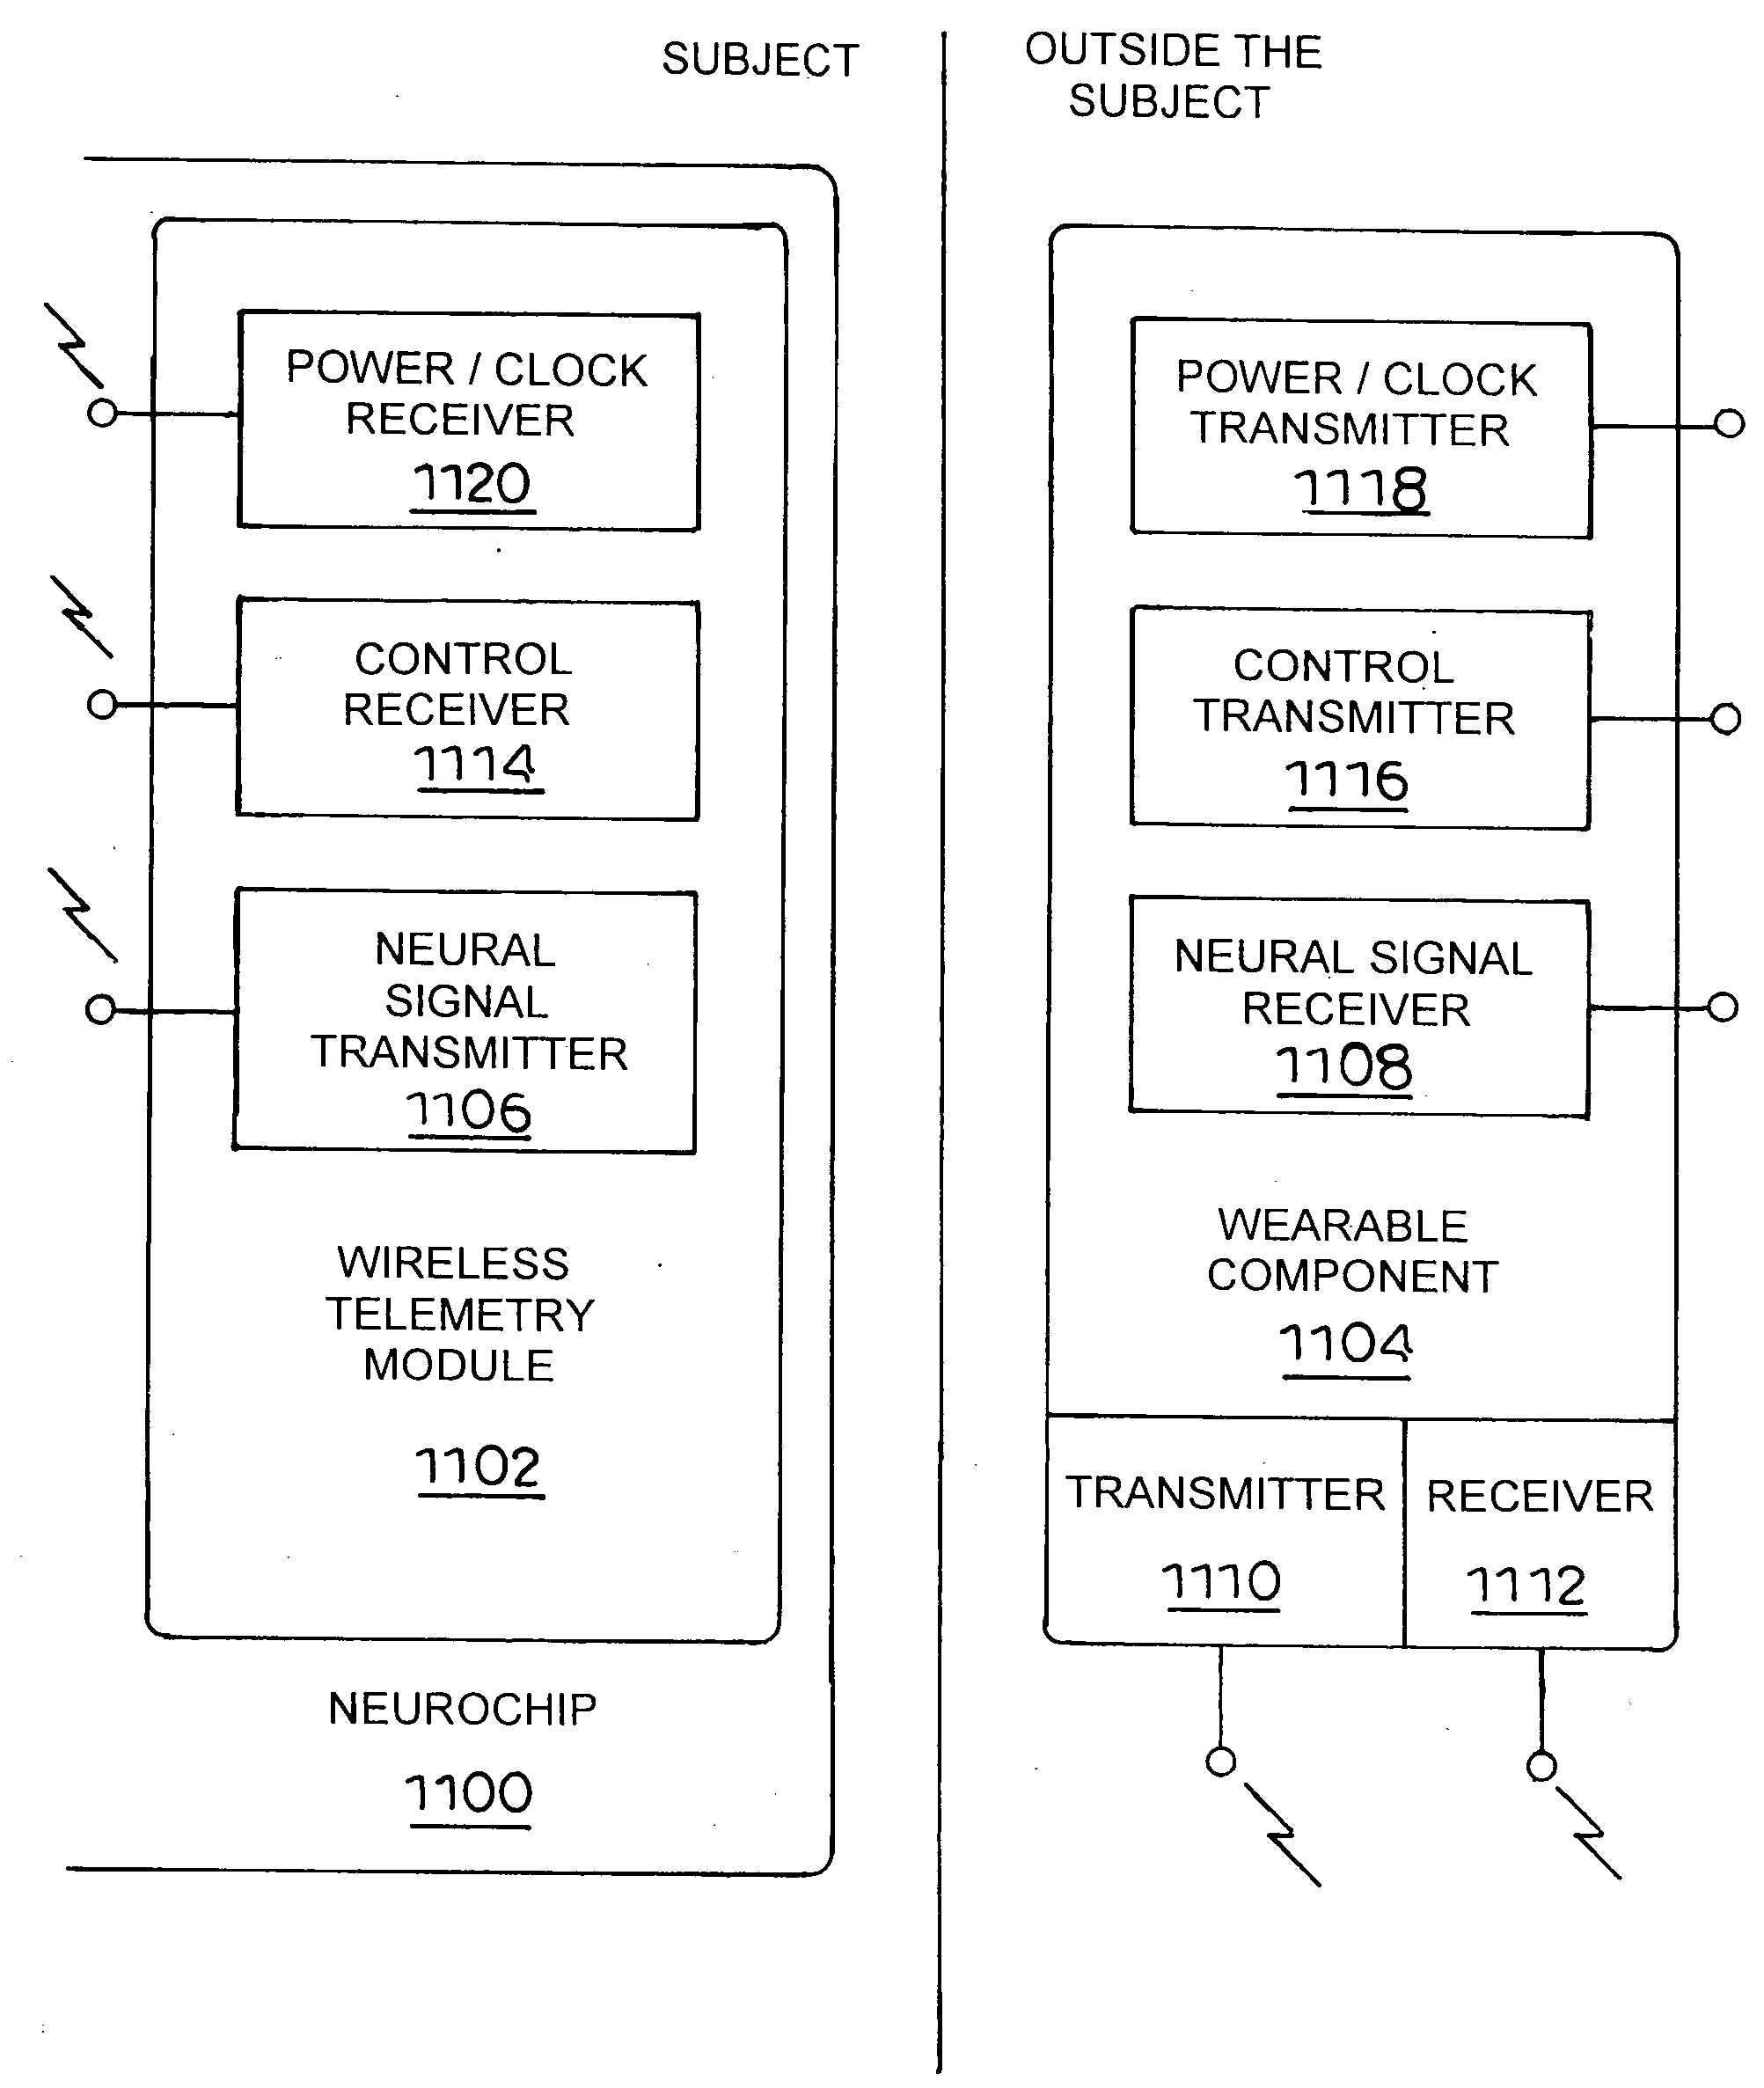 Apparatus for acquiring and transmitting neural signals and related methods